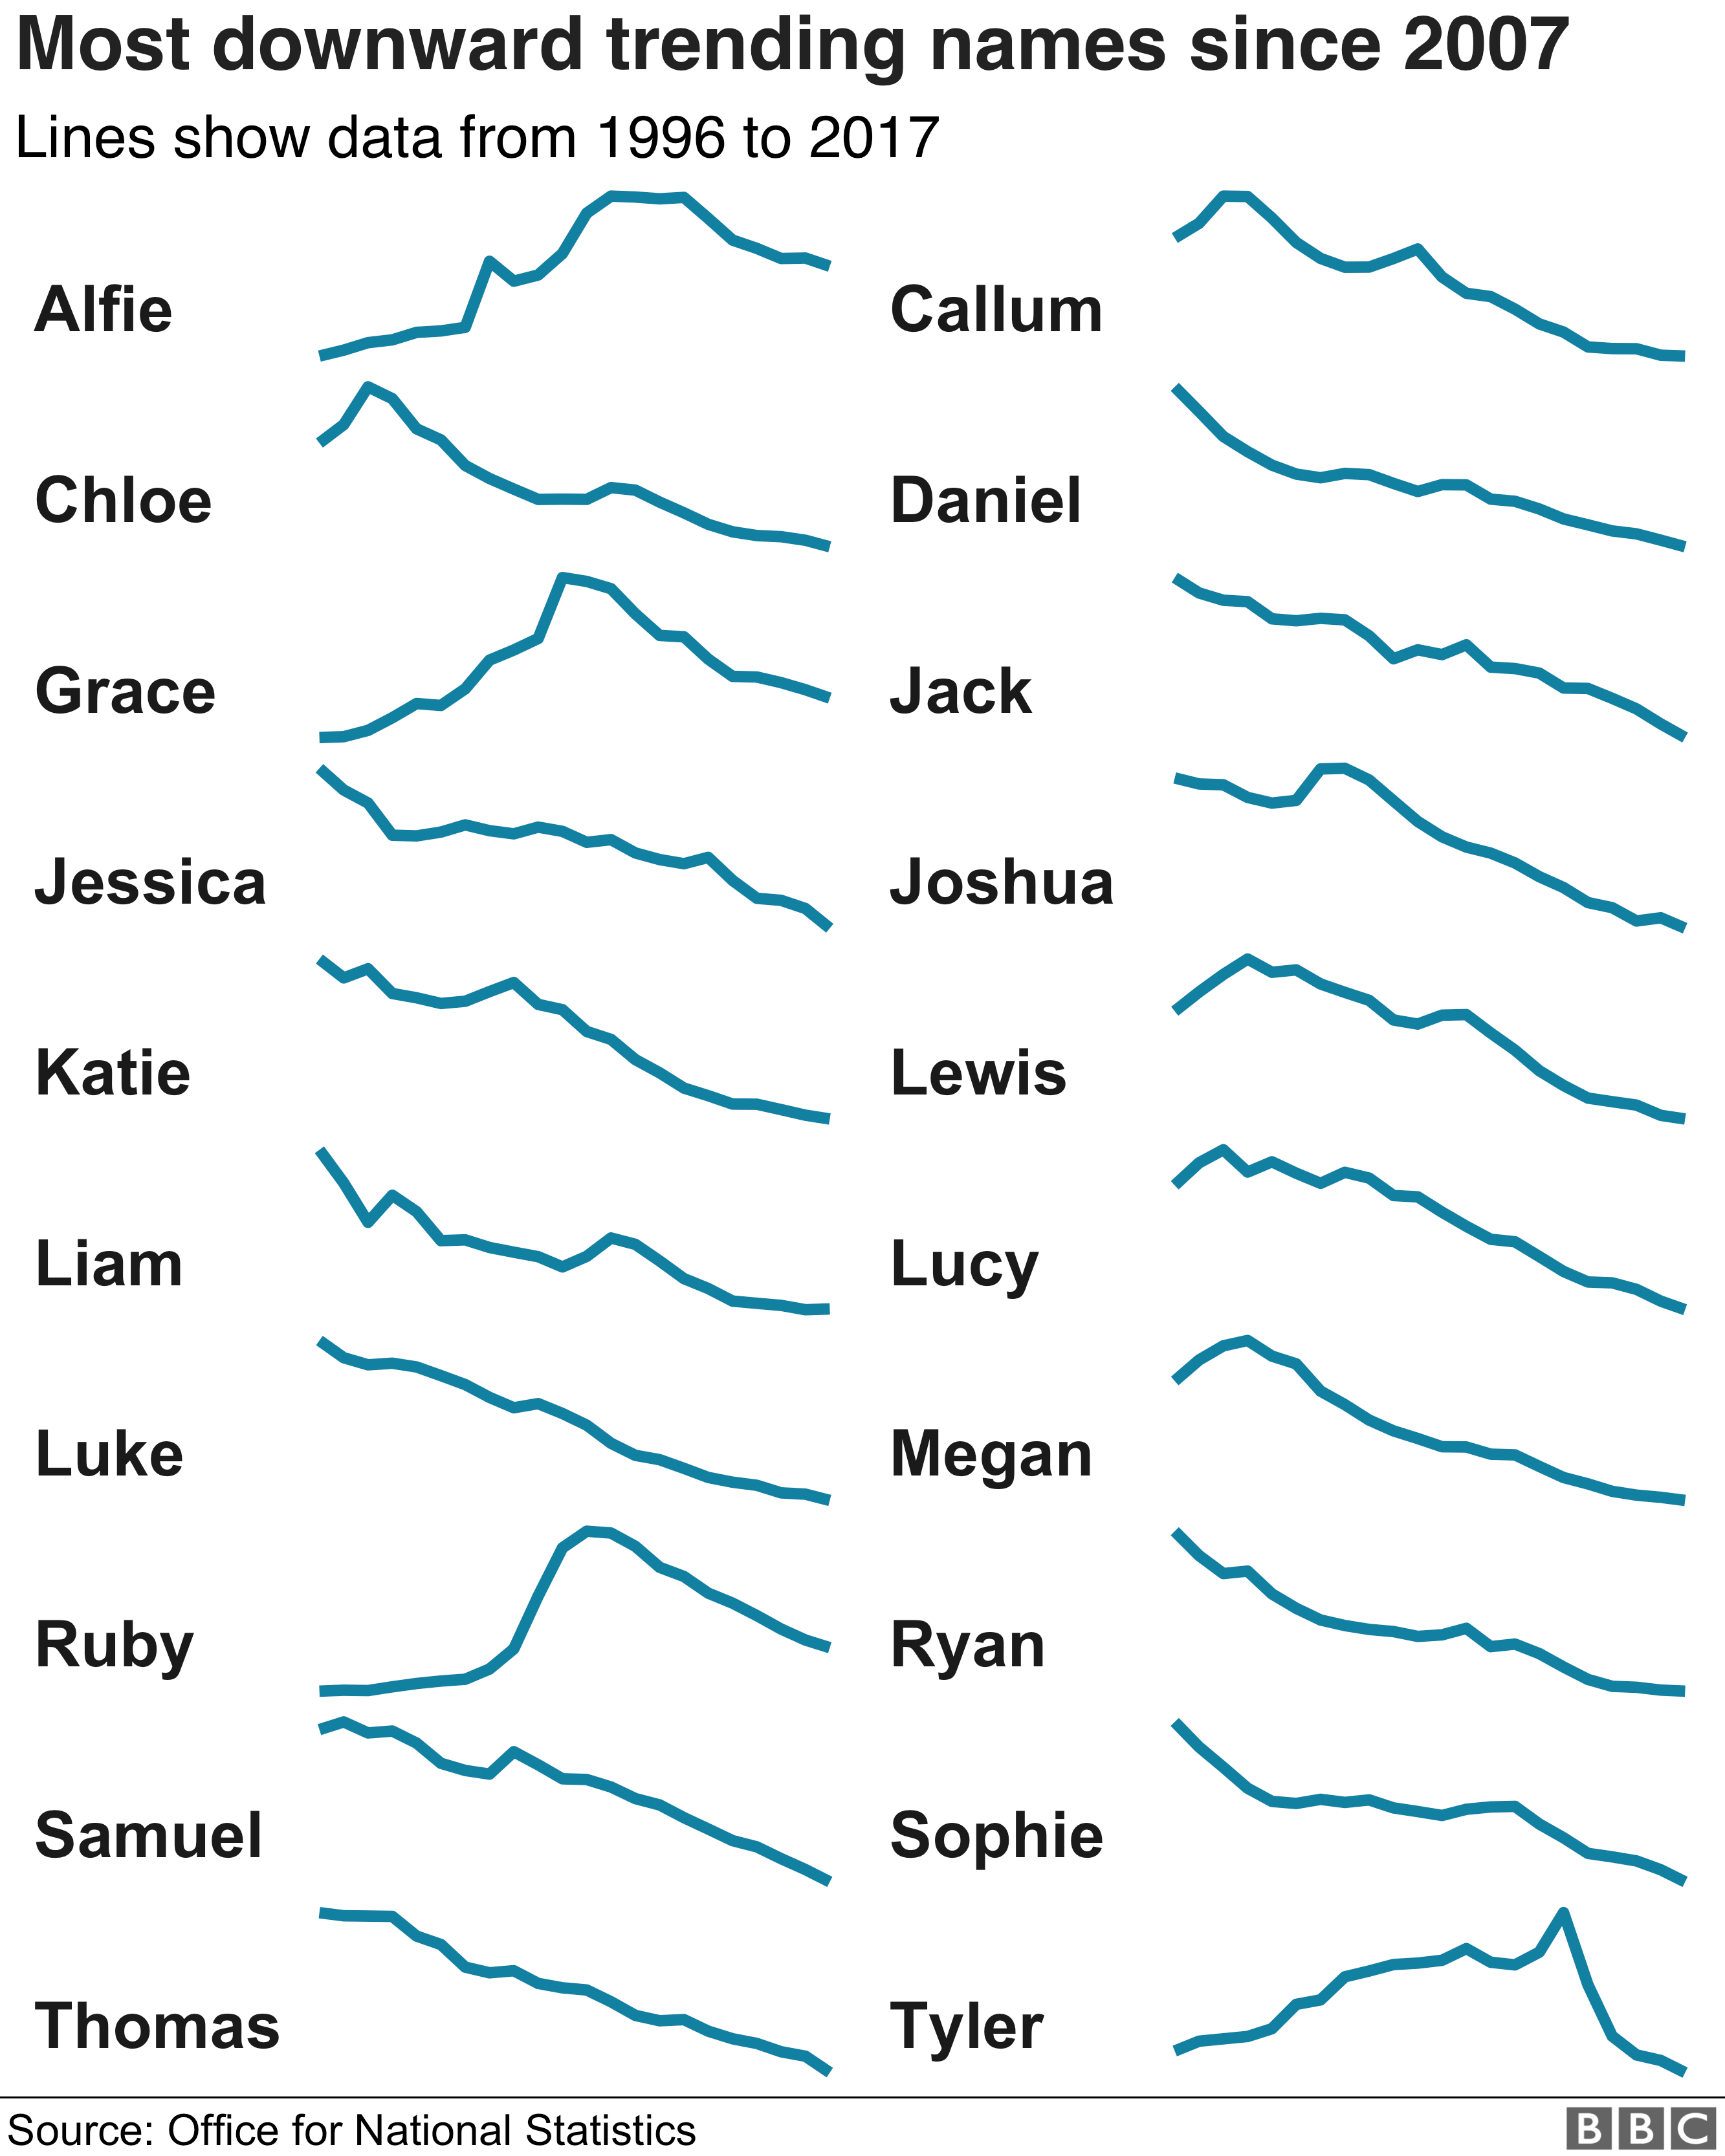 Chart showing names declining in popularity